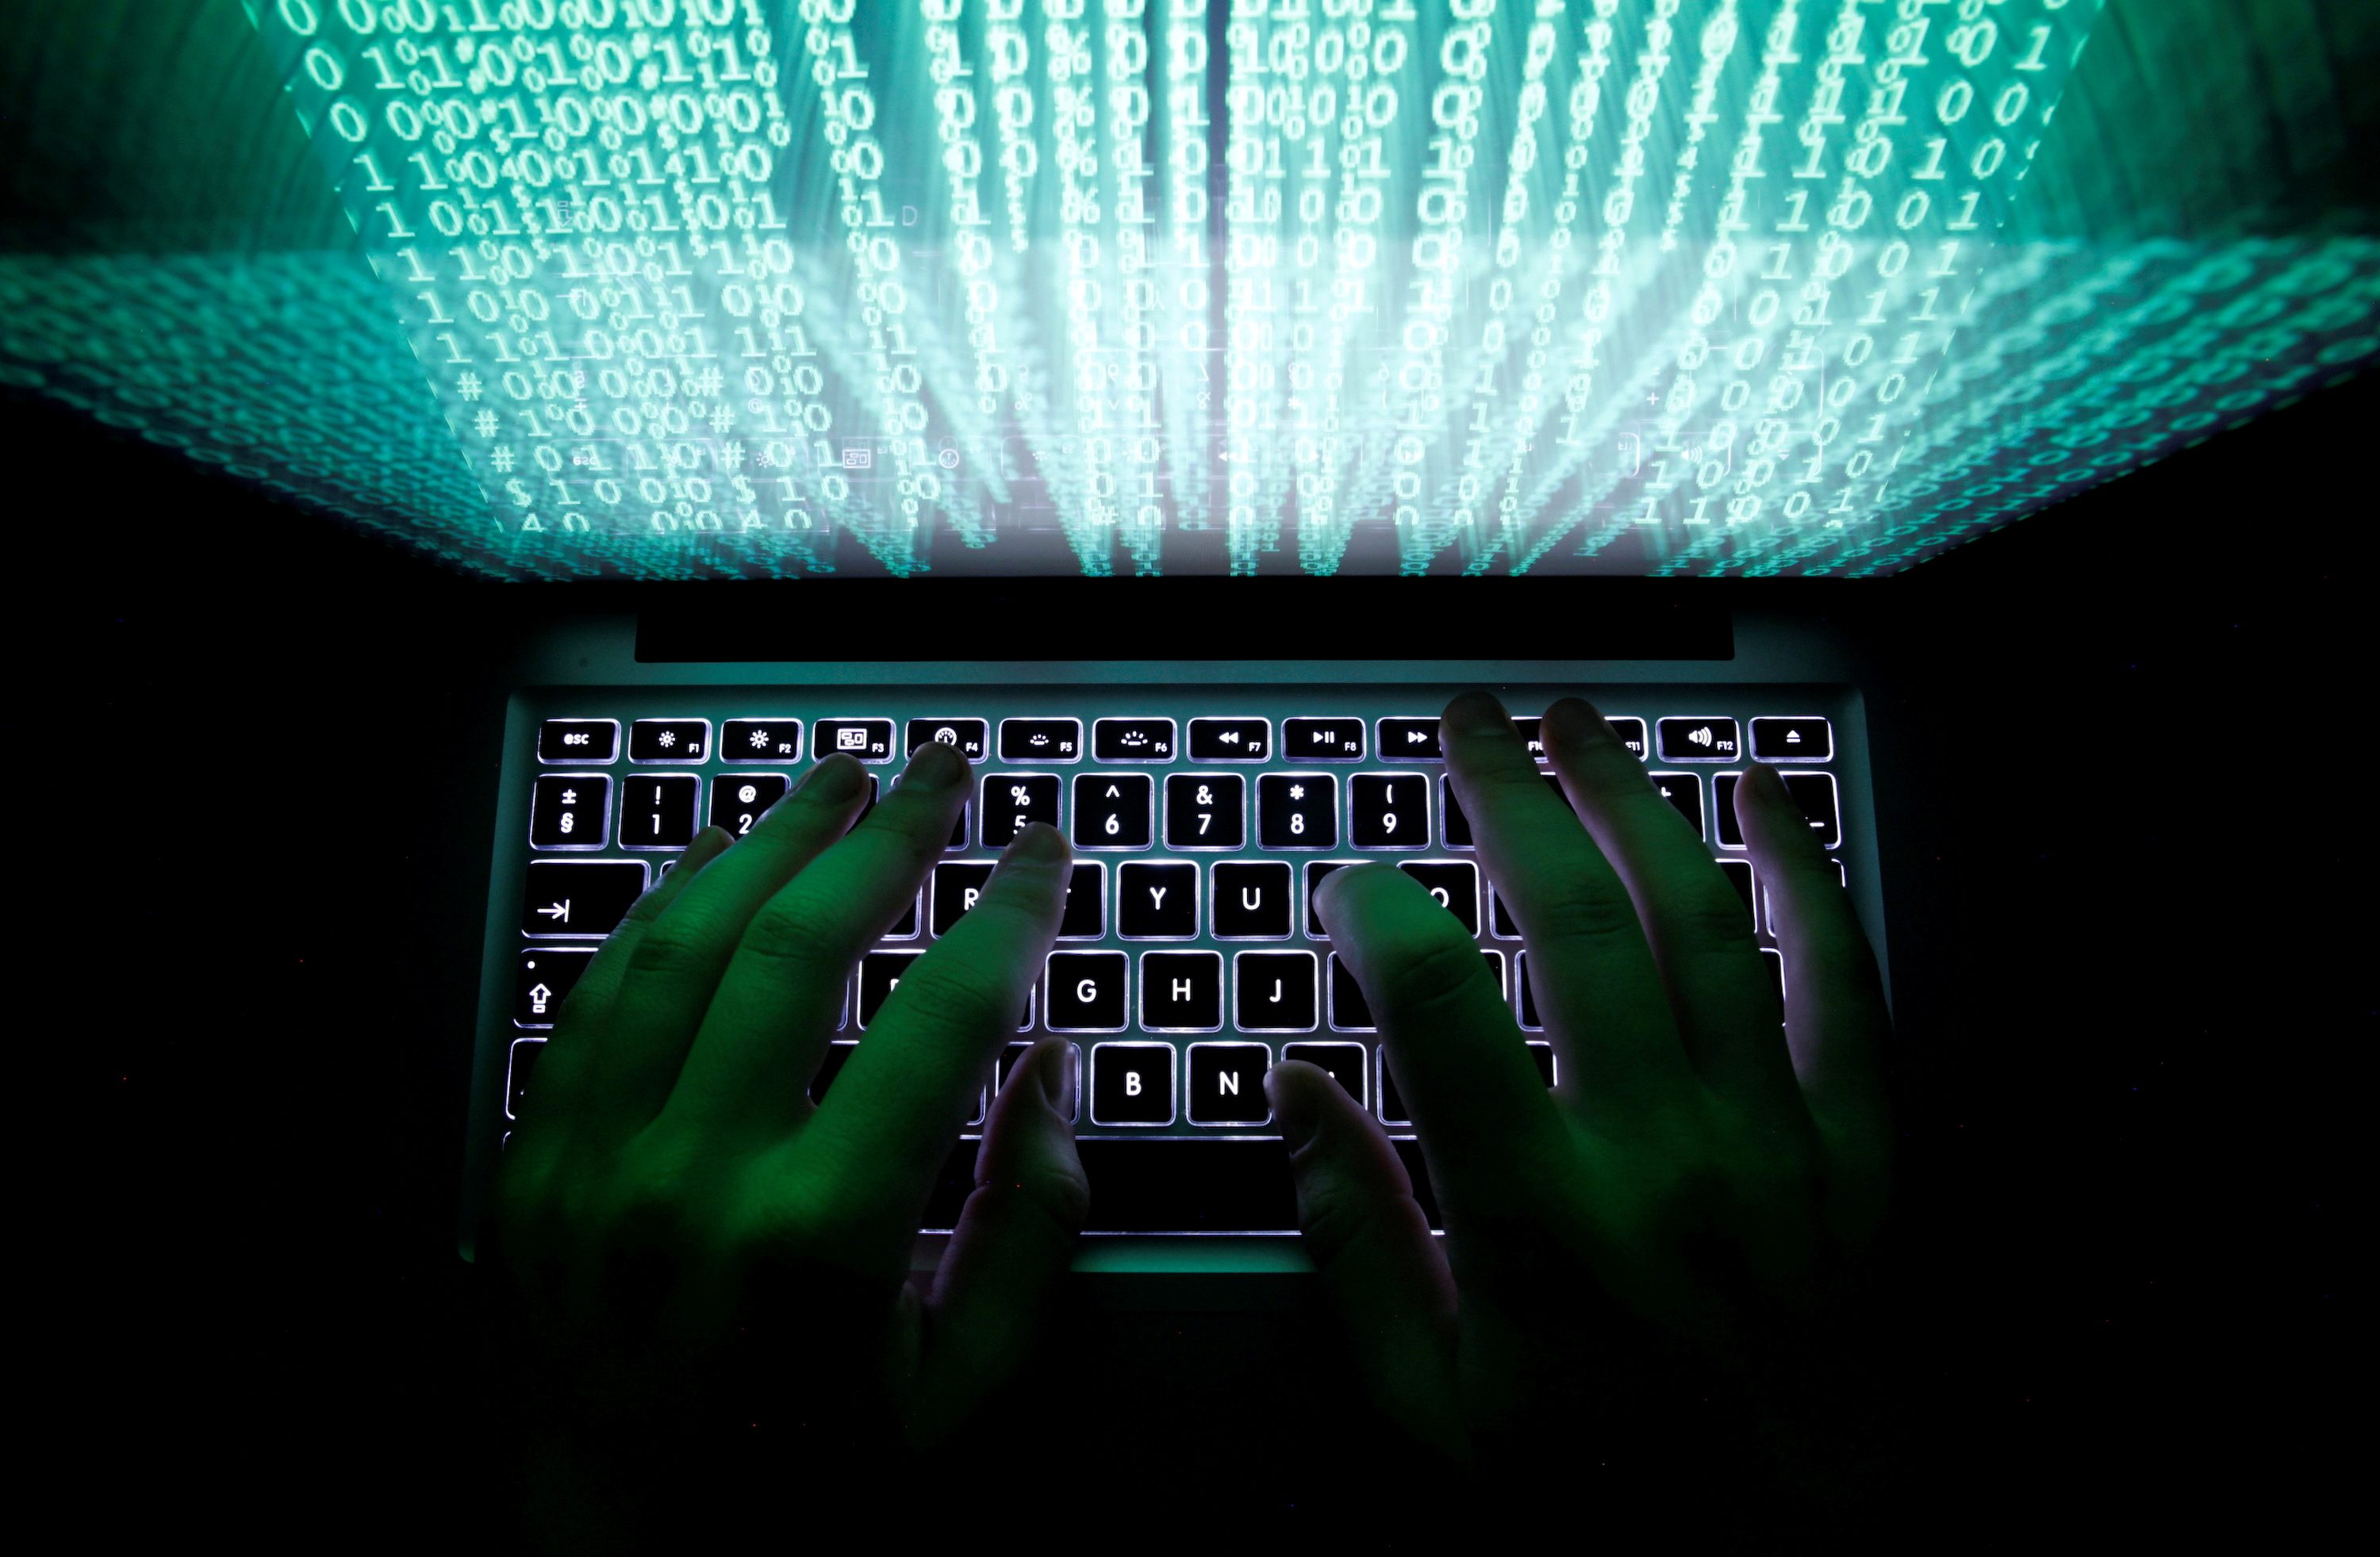 US banks prepare for cyber attacks after latest Russia sanctions